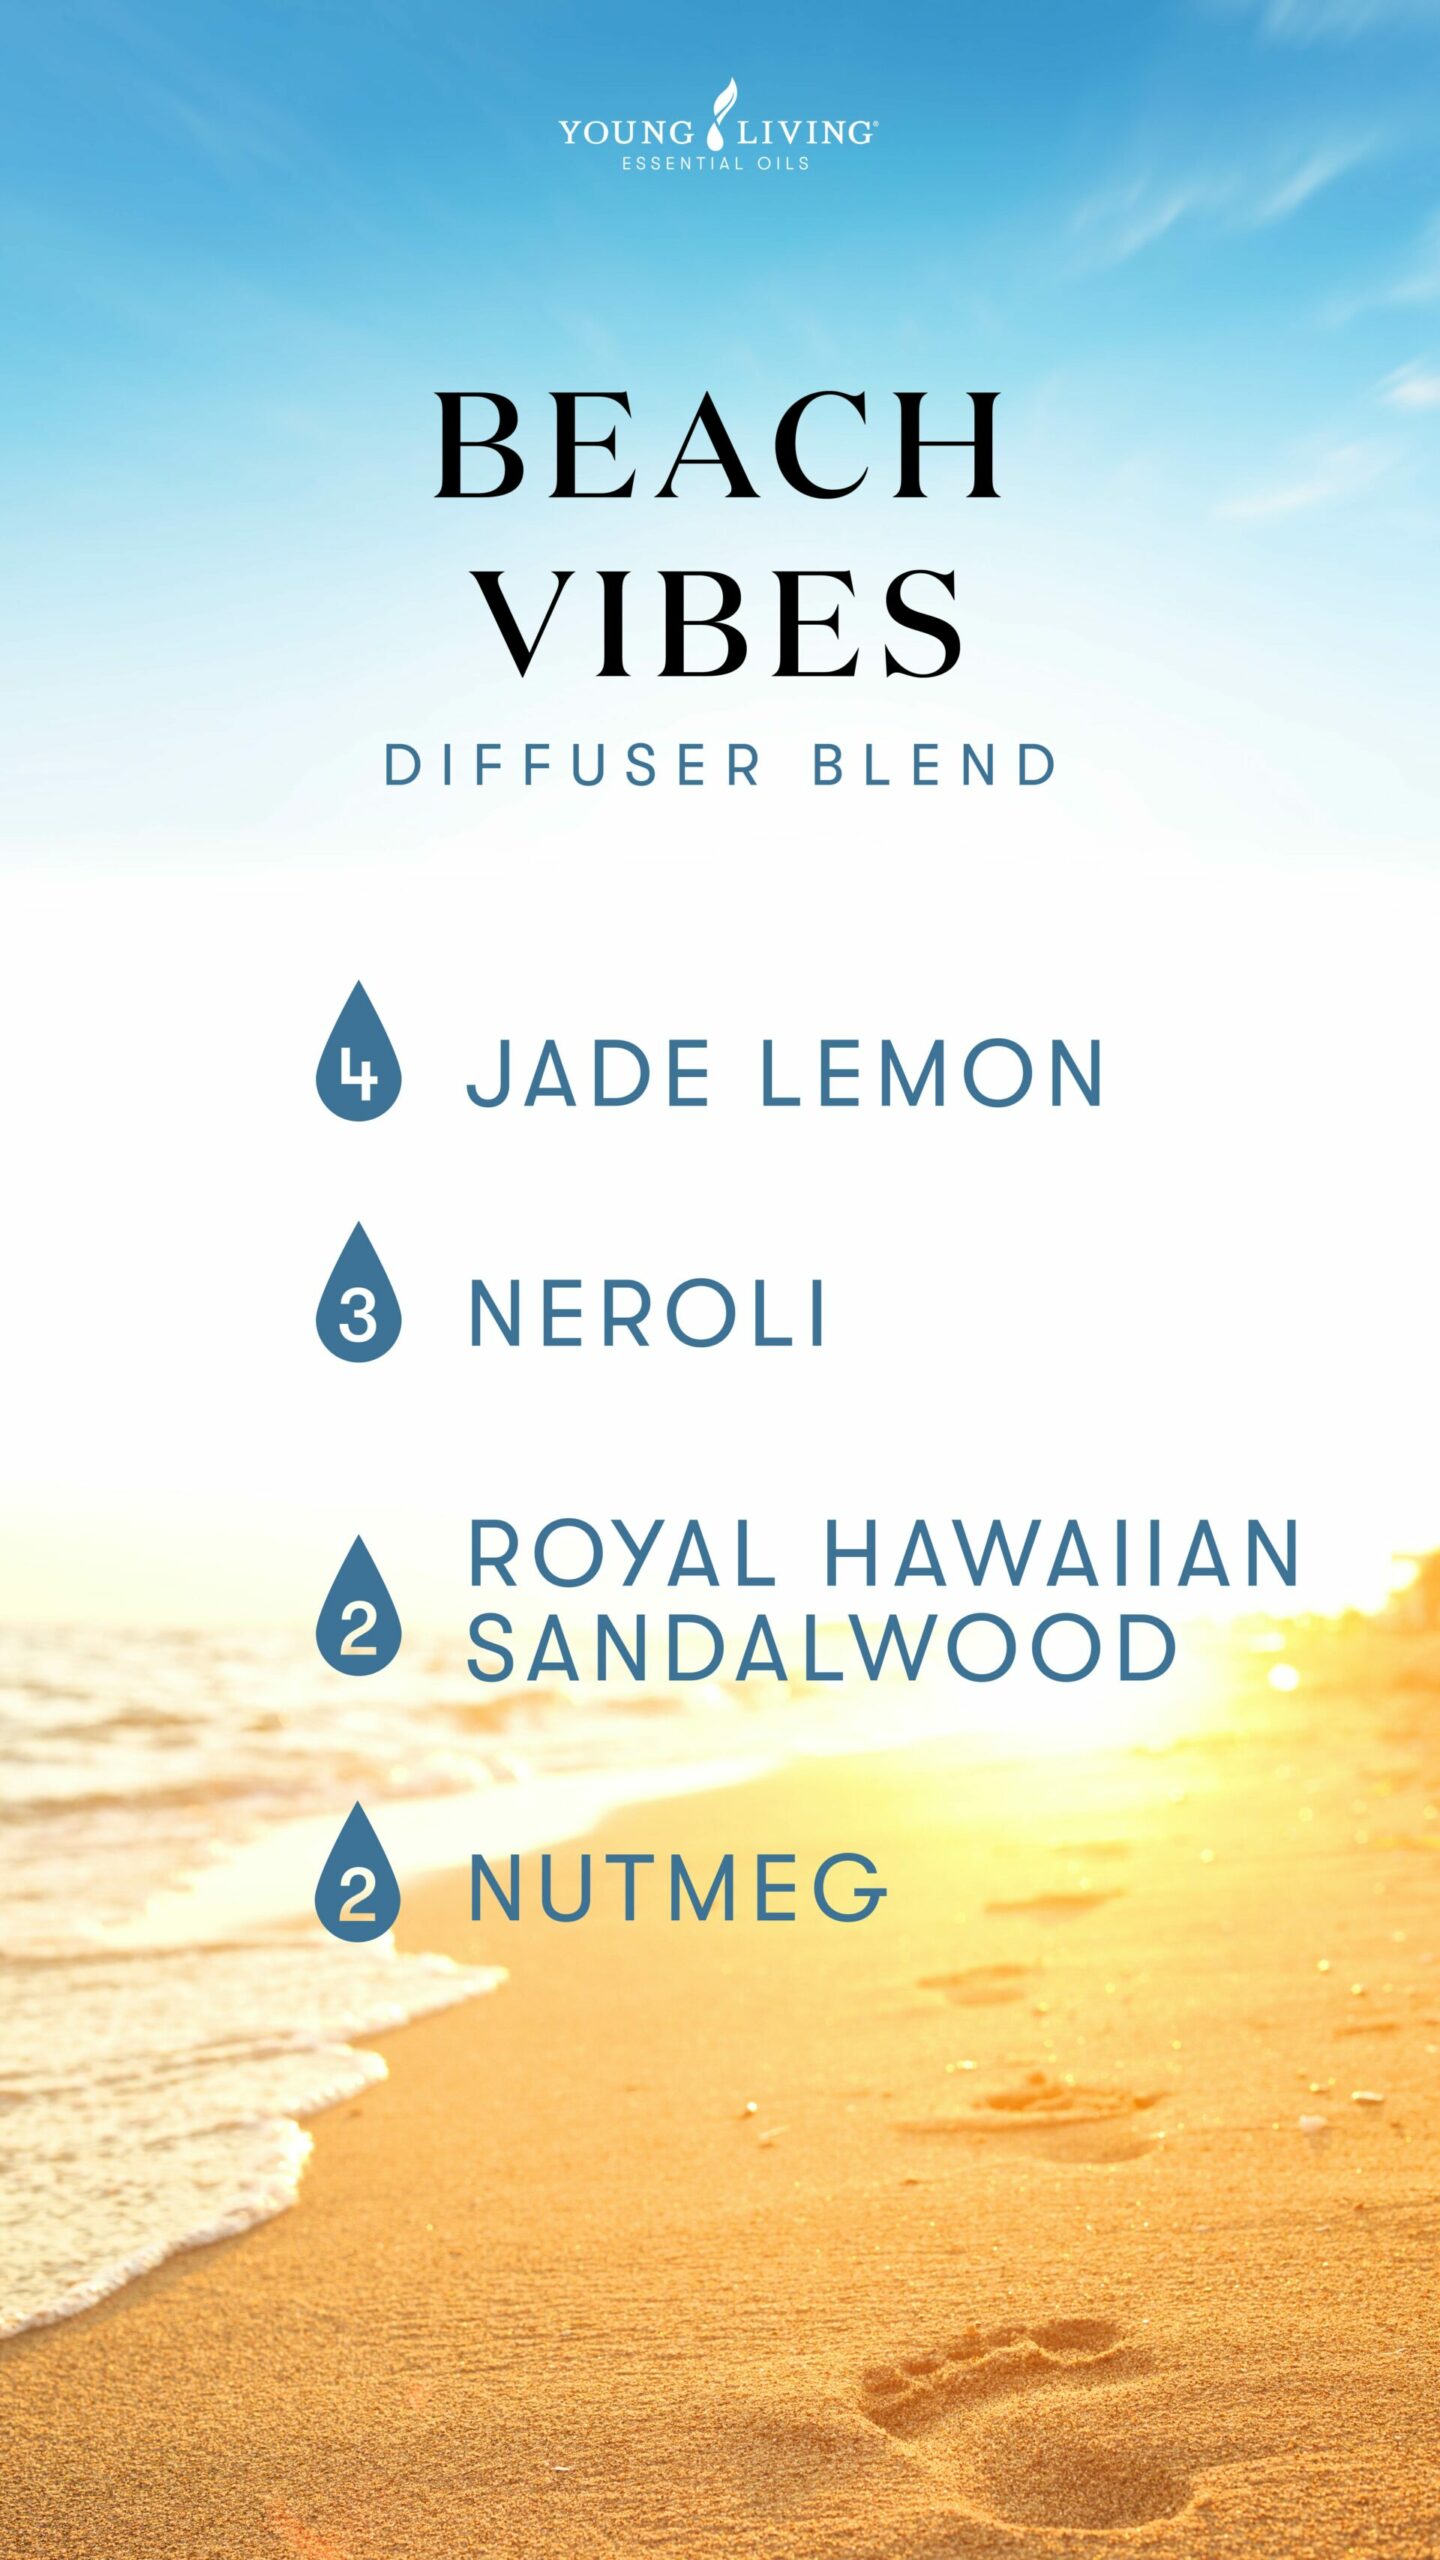 Beach Vibes Diffuser Blend - Young Living Lavender Life Blog 